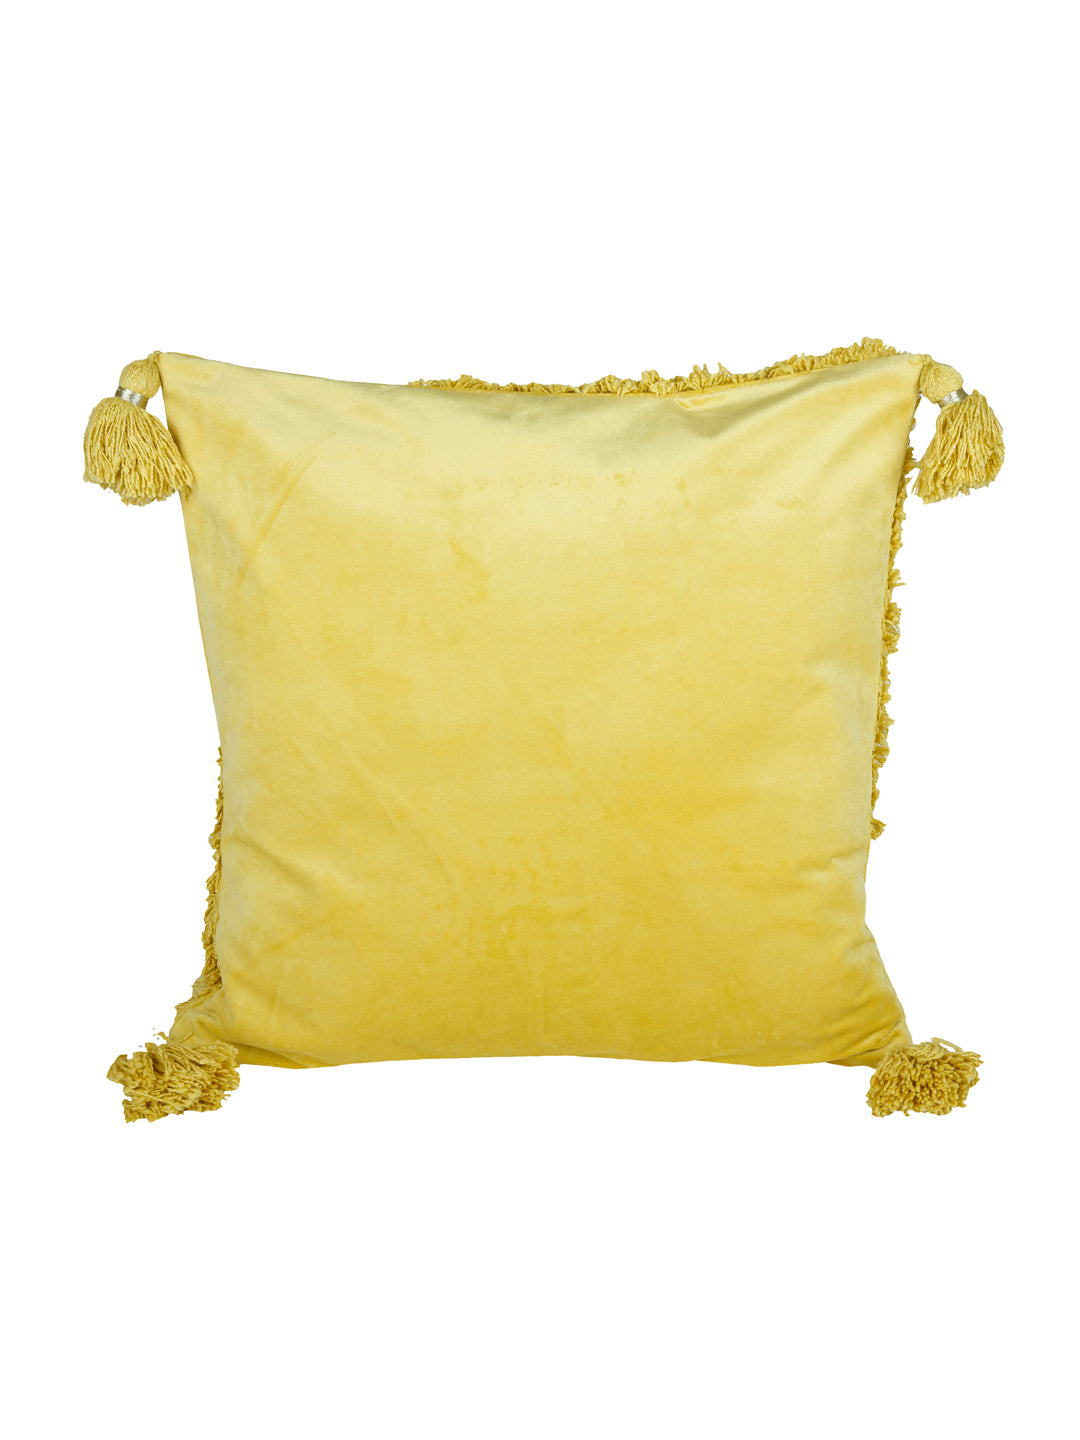 Set of 2 Yellow Self-Design Square Velvet Sustainable Cushion Covers